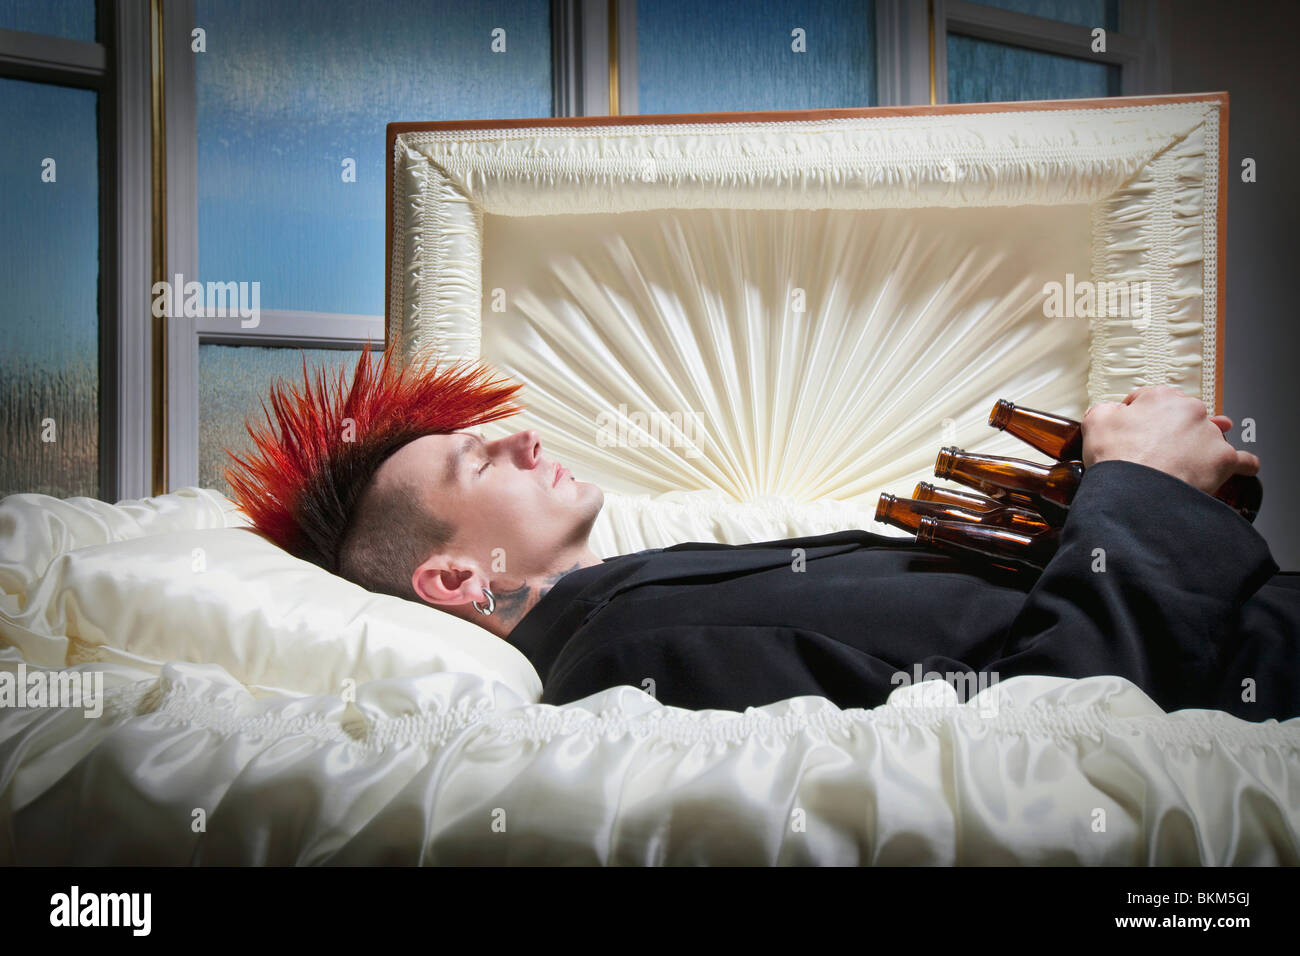 Photographer Describes the Beautiful Experience of Dressing and Photographing Deceased ...